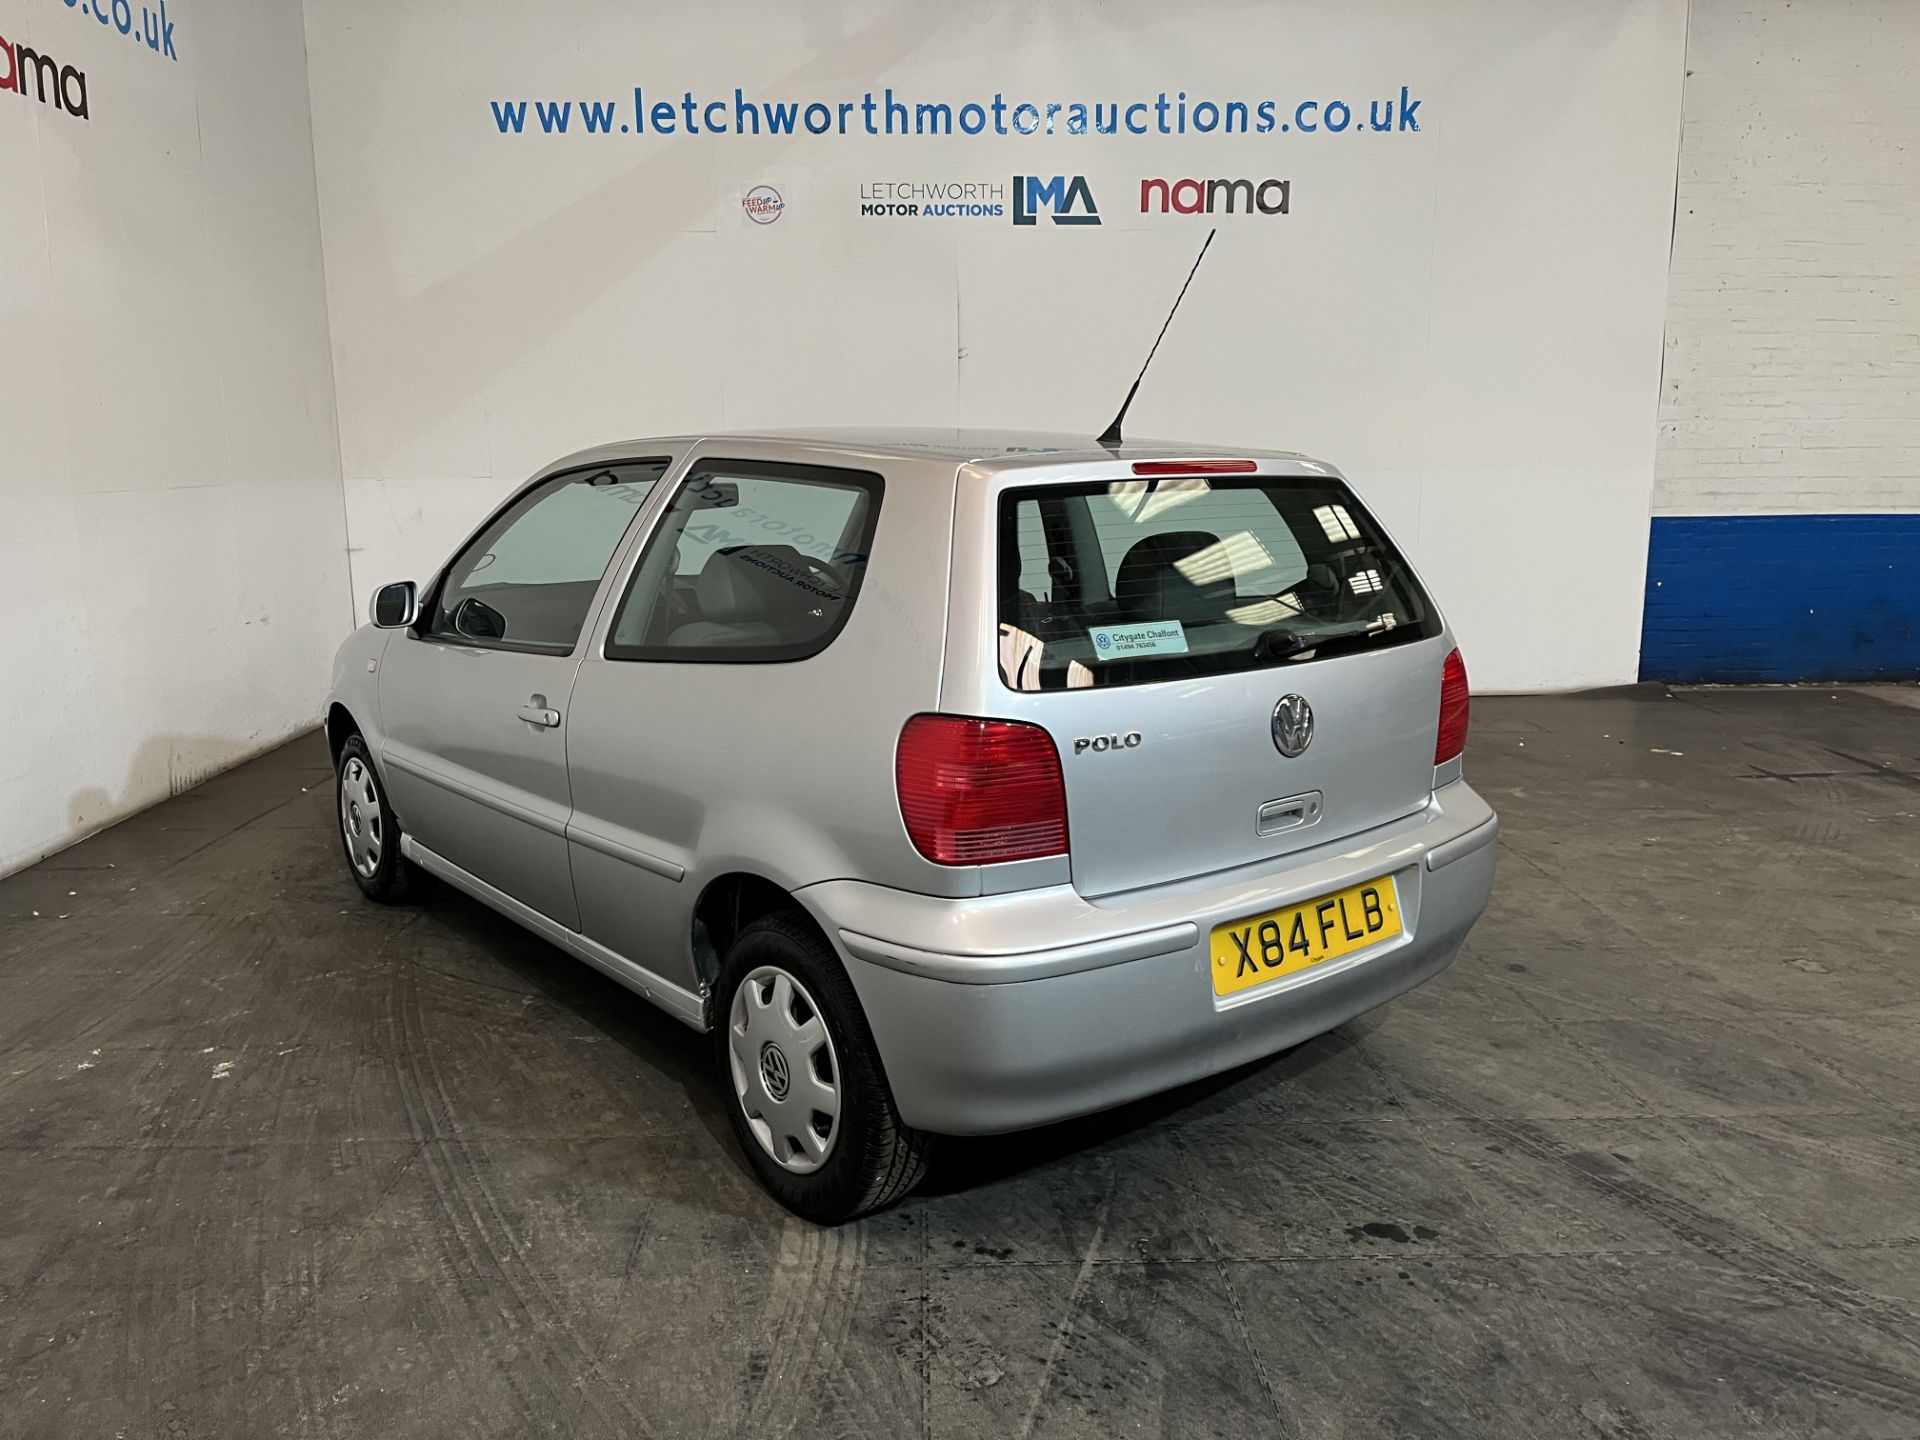 2000 Volkswagen Polo S - 1390cc - Image 4 of 16